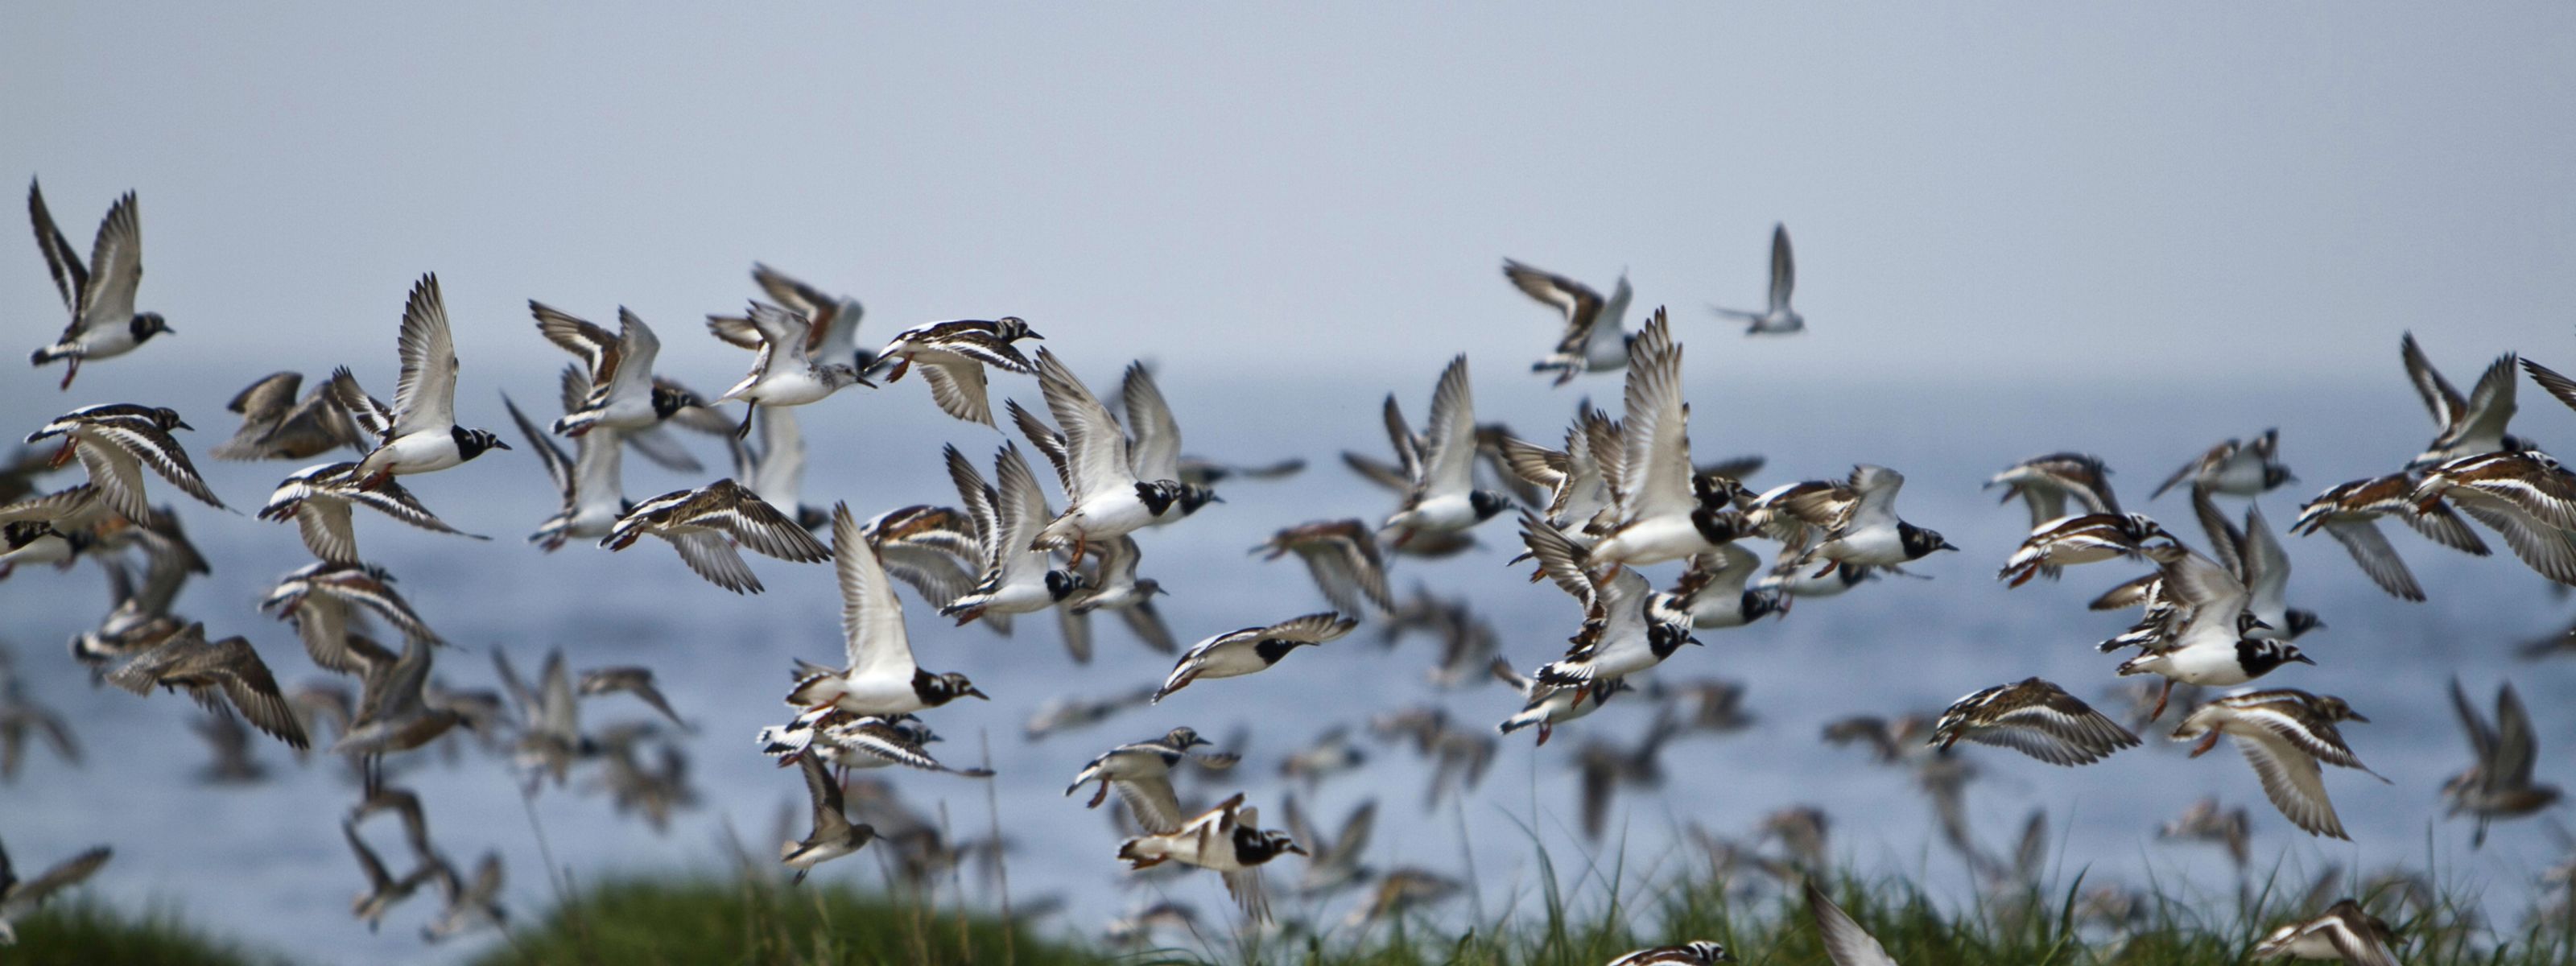 Several black and white shorebirds flying in the sky.